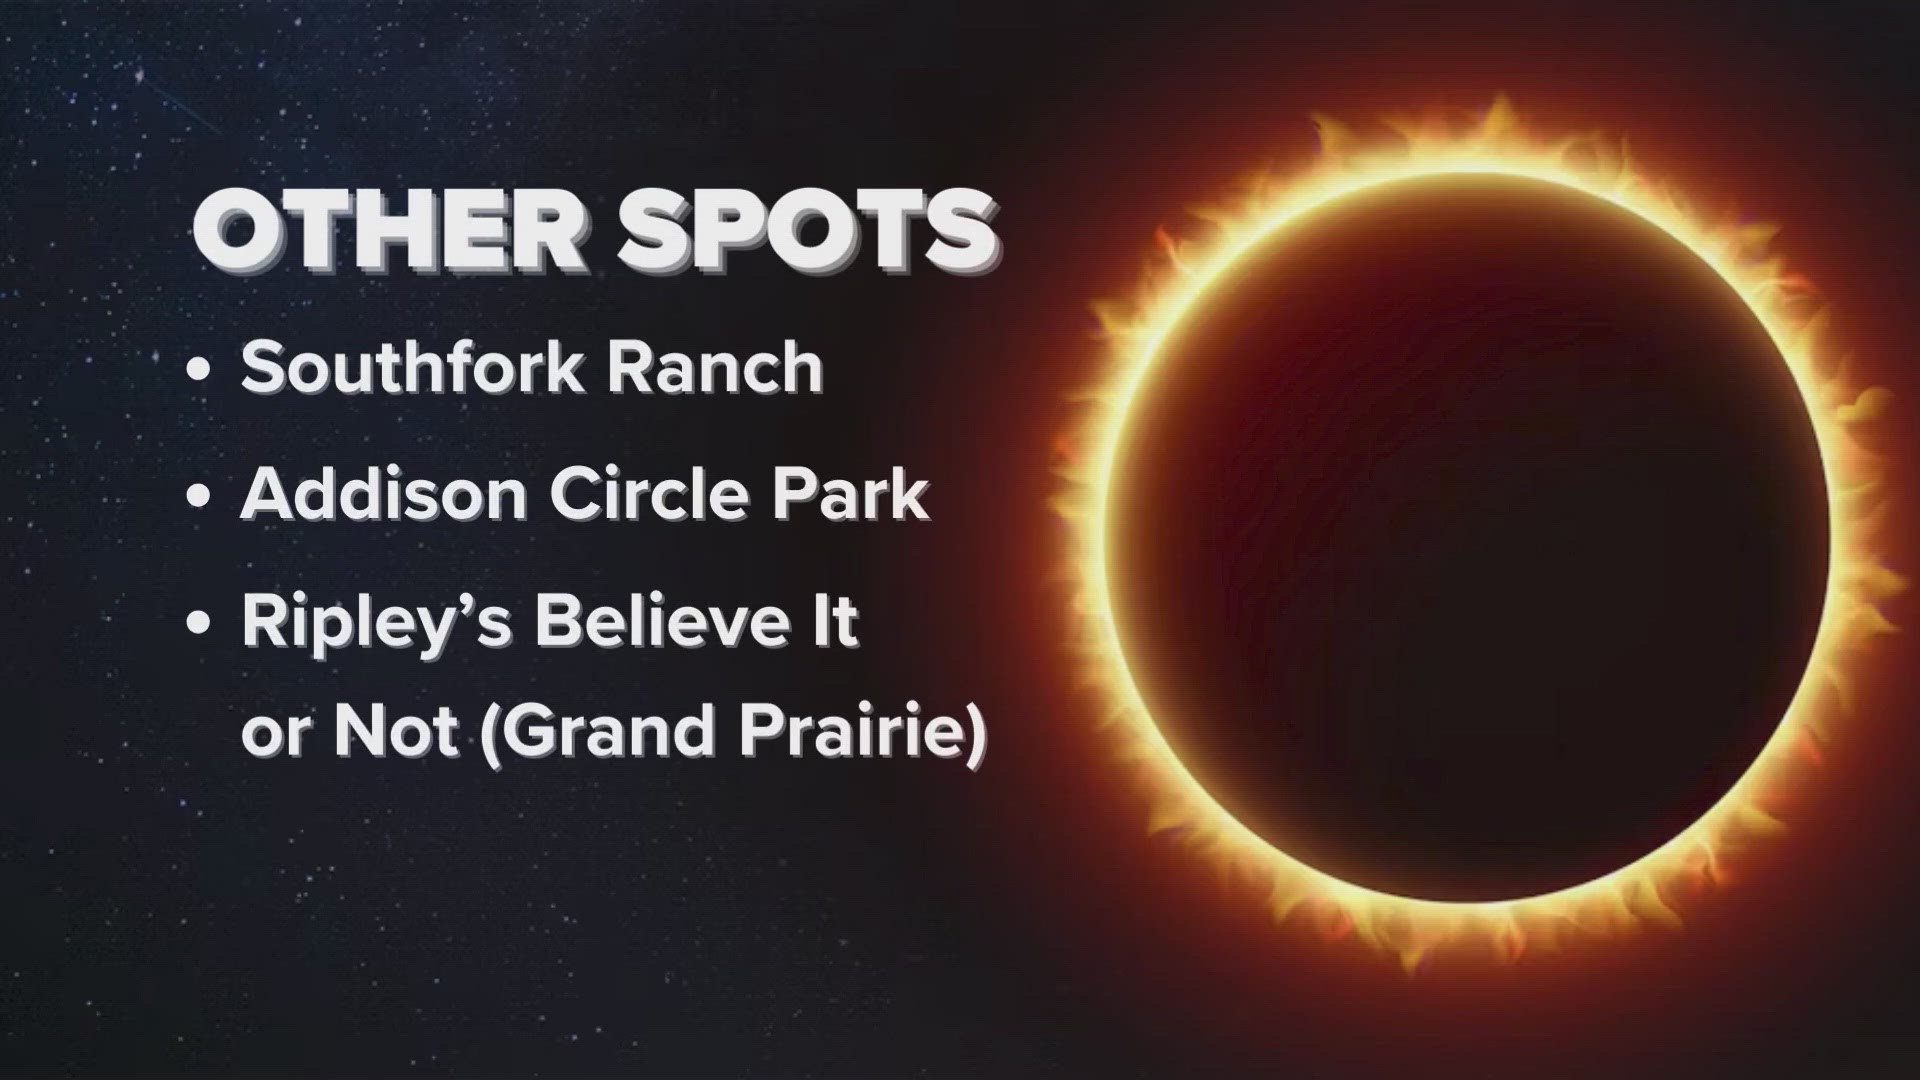 Dallas is the largest city in the path of totality during the total solar eclipse on April 8.